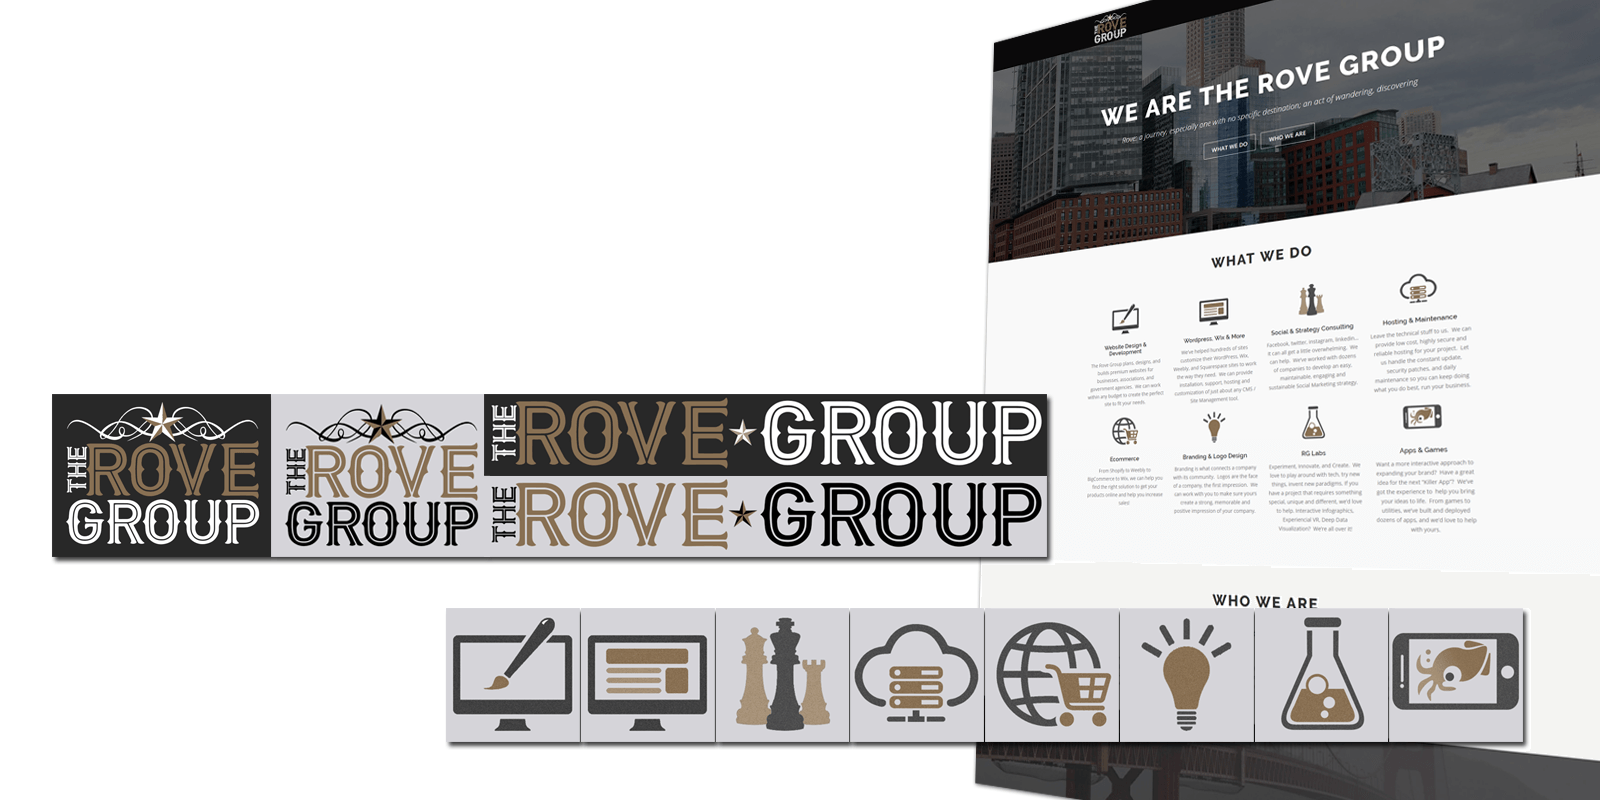 The Rove Group